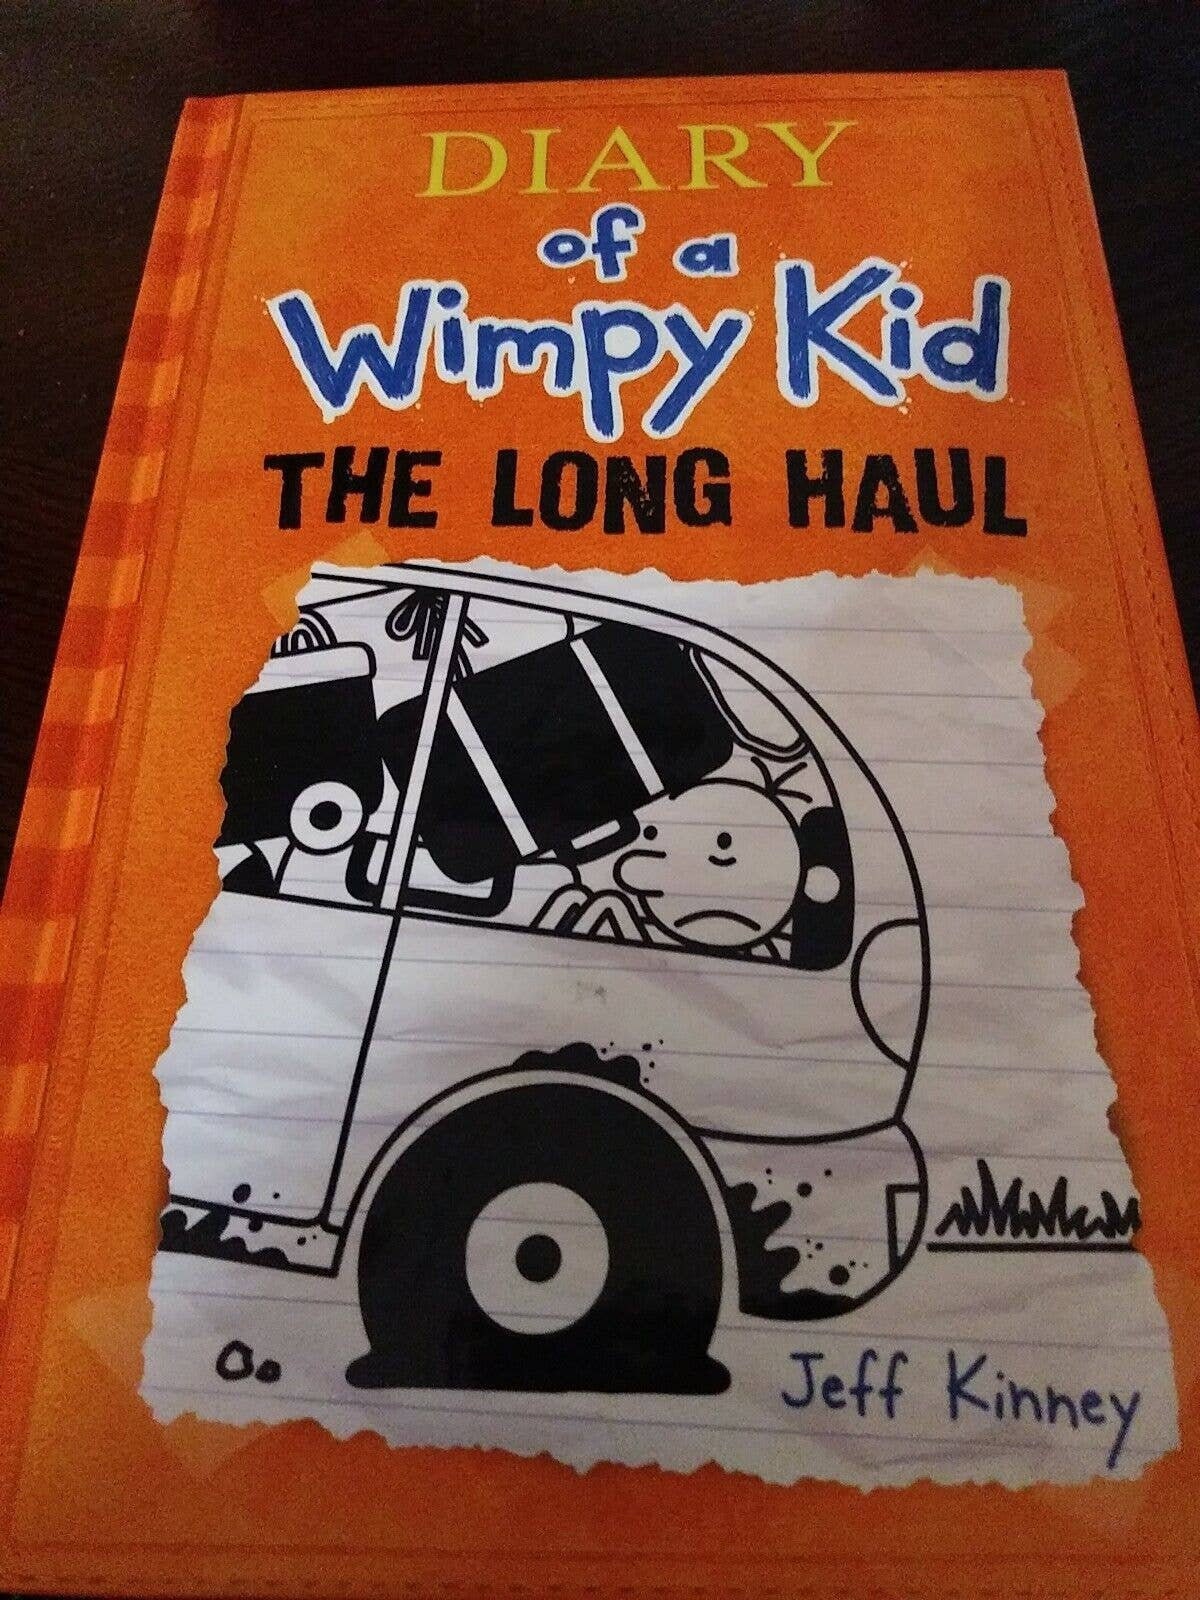 Diary of a Wimpy Kid: The Long Haul by Jeff Kinney (Paperback)